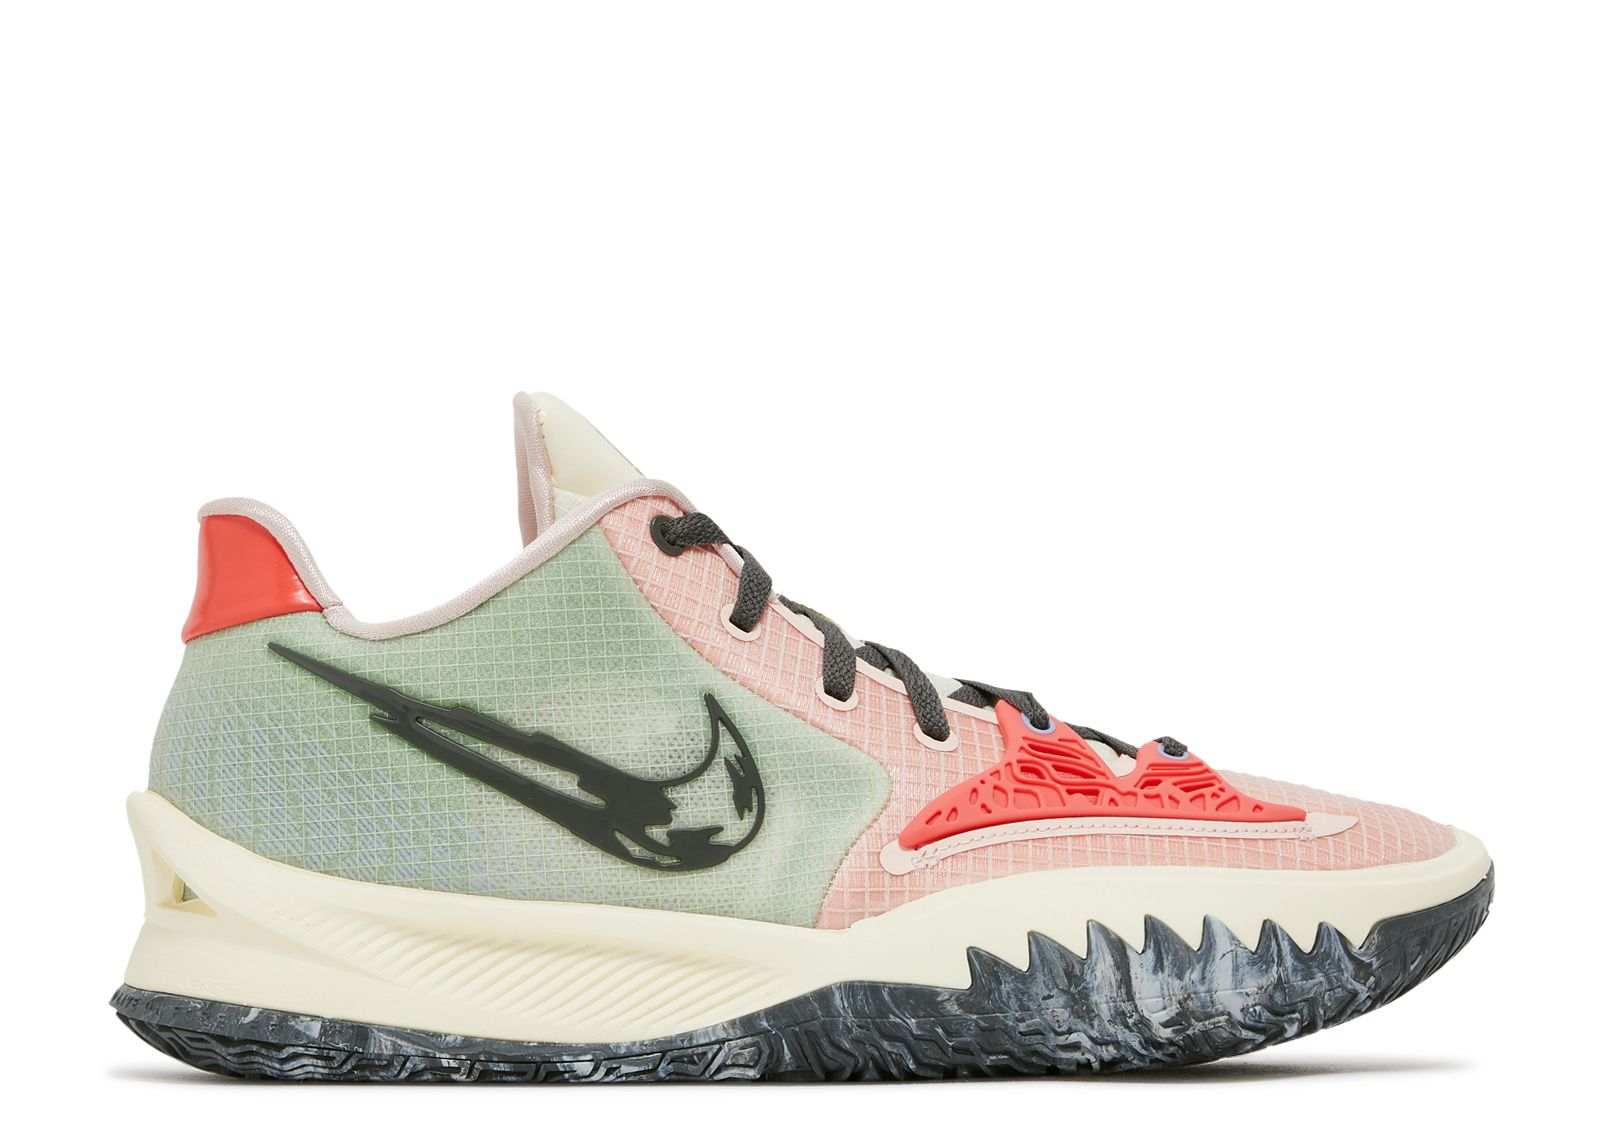 NIKE KYRIE LOW 4 PALE CORAL for £140.00